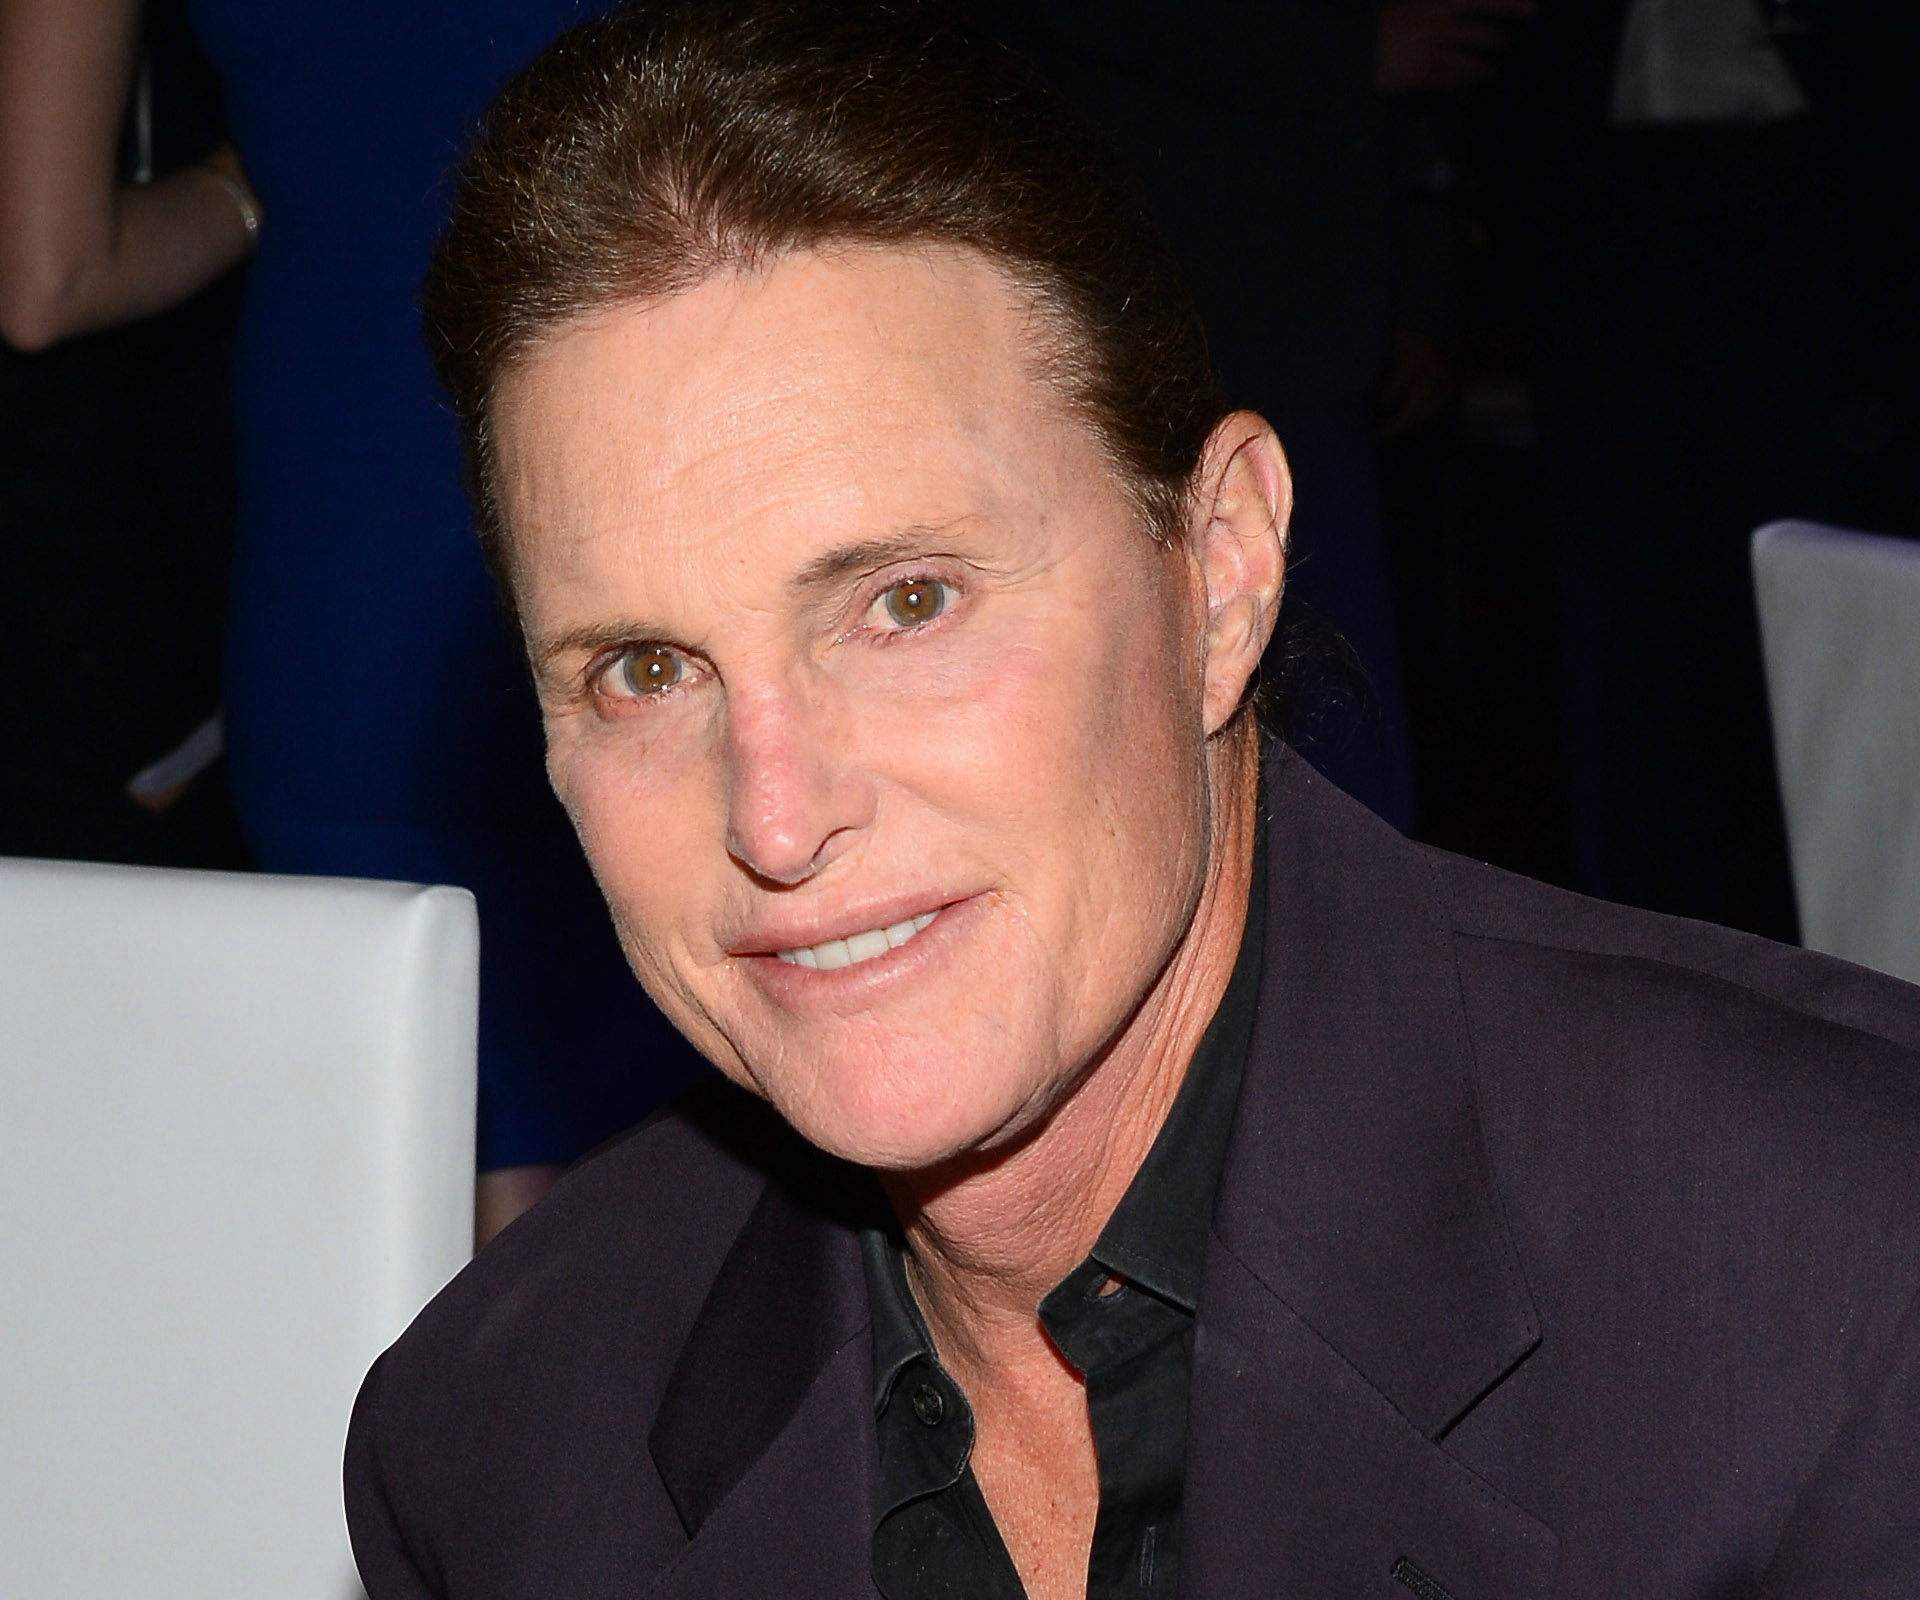 Bruce Jenner confirms: “for all intents and purposes, I am a woman”